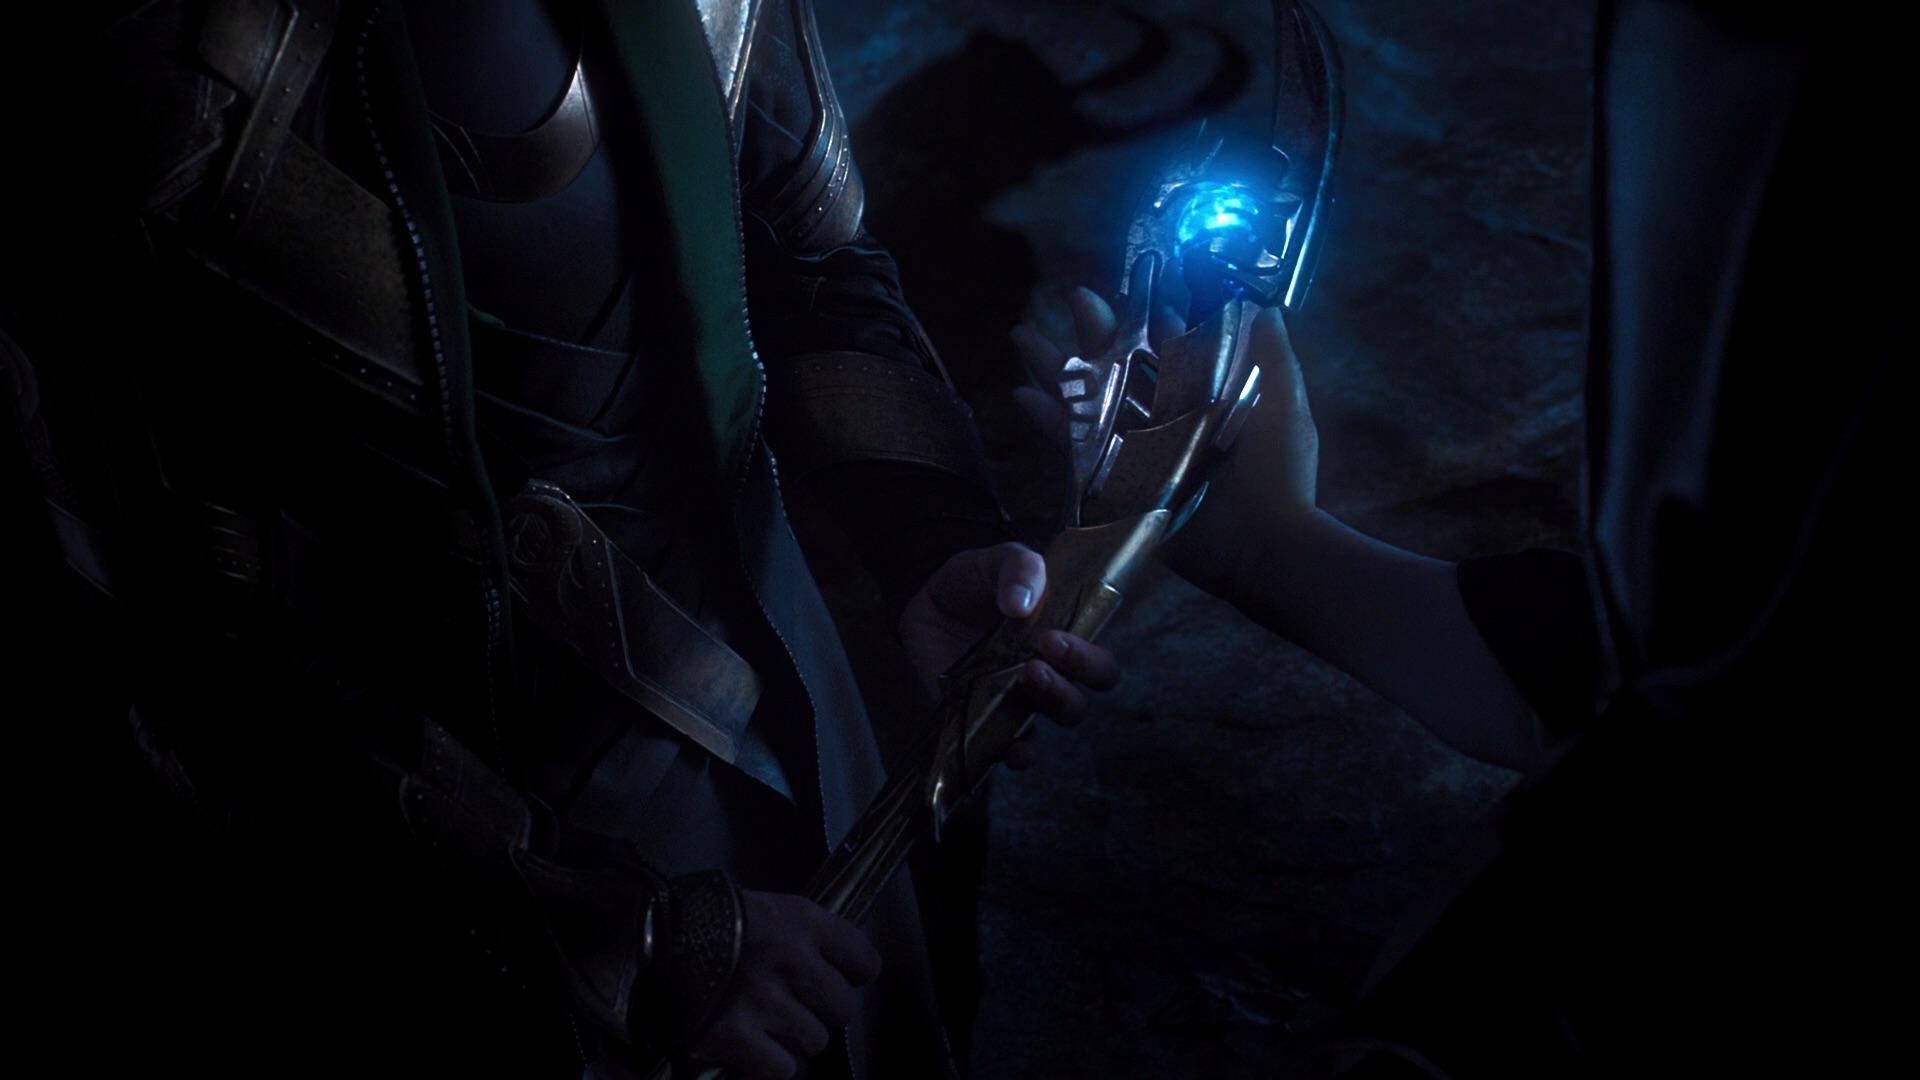 Why Did Thanos Give The Scepter To Loki If He Was Collecting